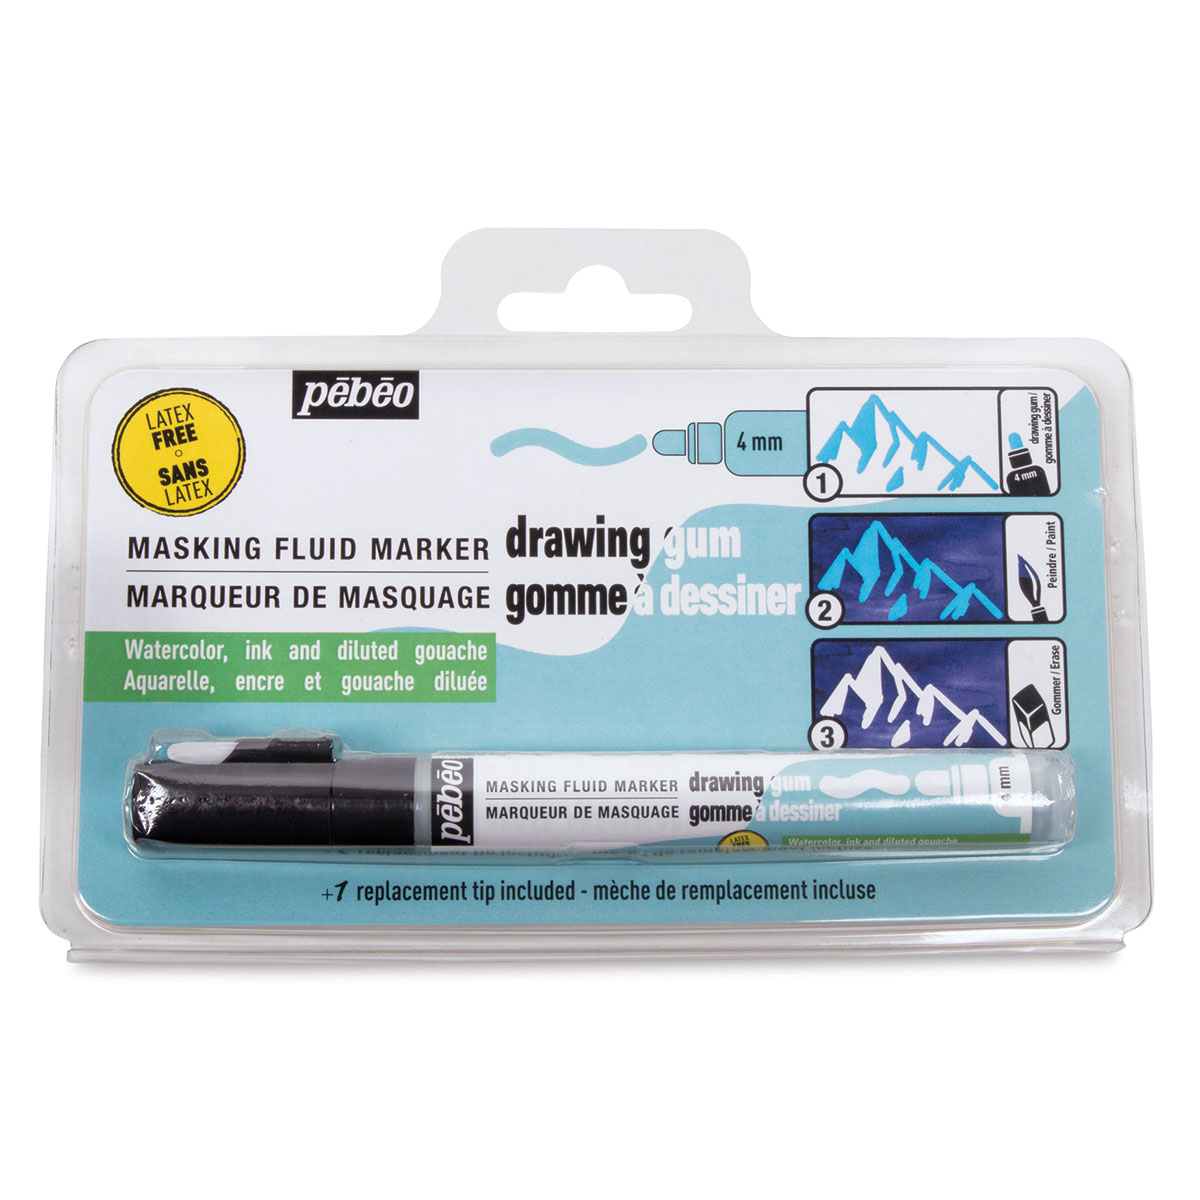  Pebeo Drawing Gum Marker .7mm-Natural Latex, 0,7 mm, 1